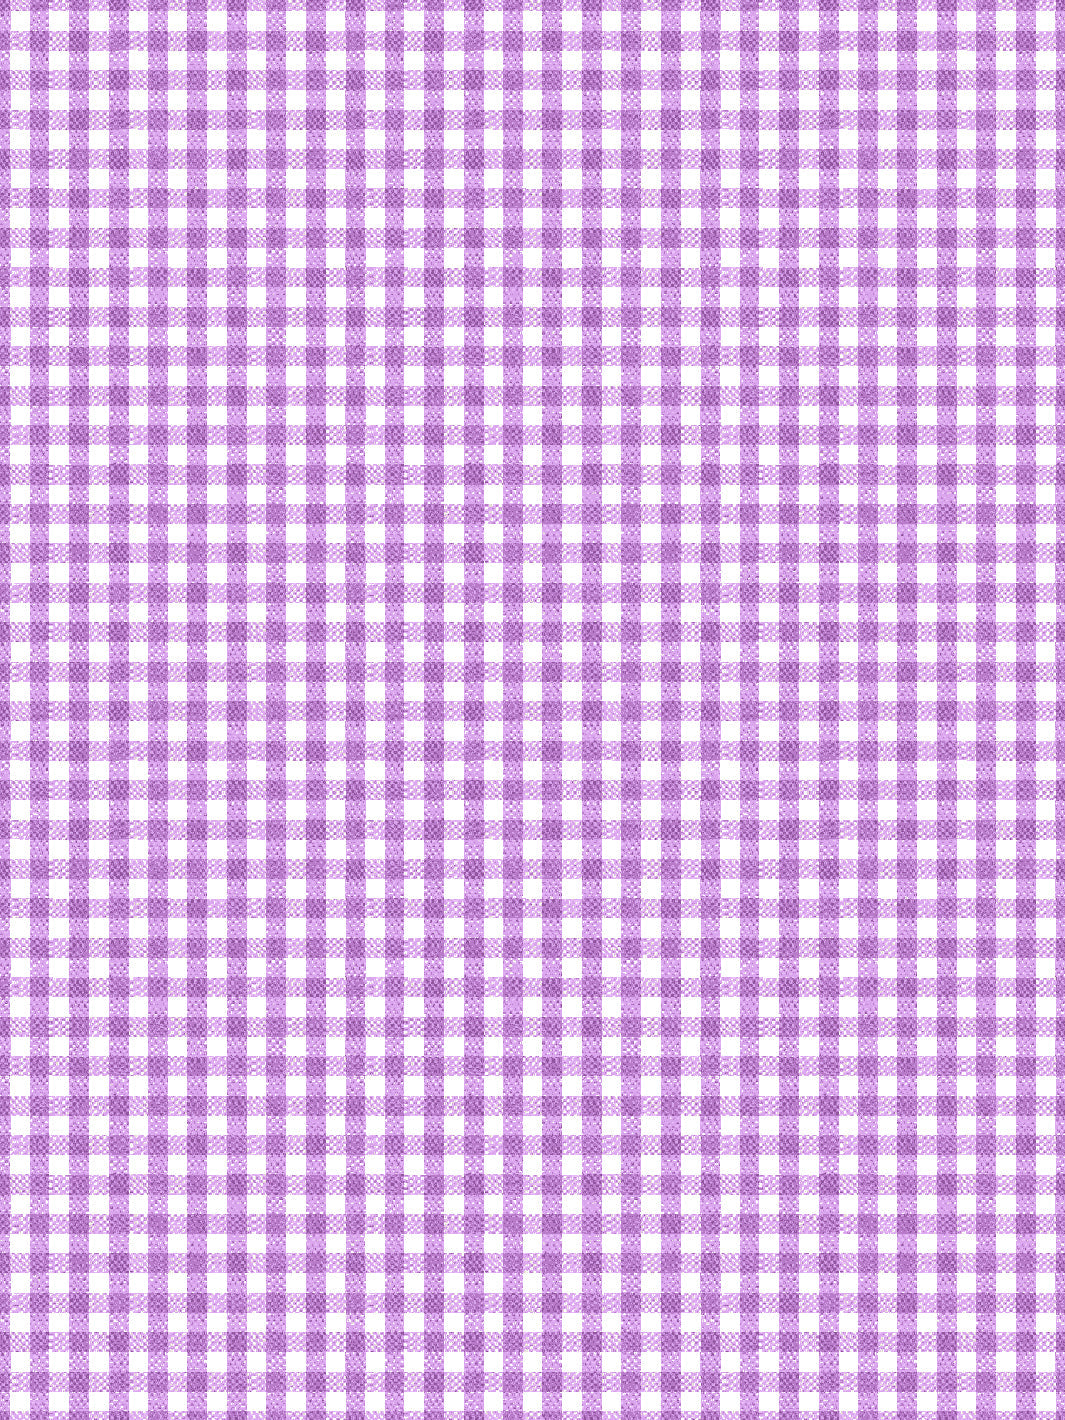 'Pixie Gingham' Wallpaper by Sarah Jessica Parker - Lilac